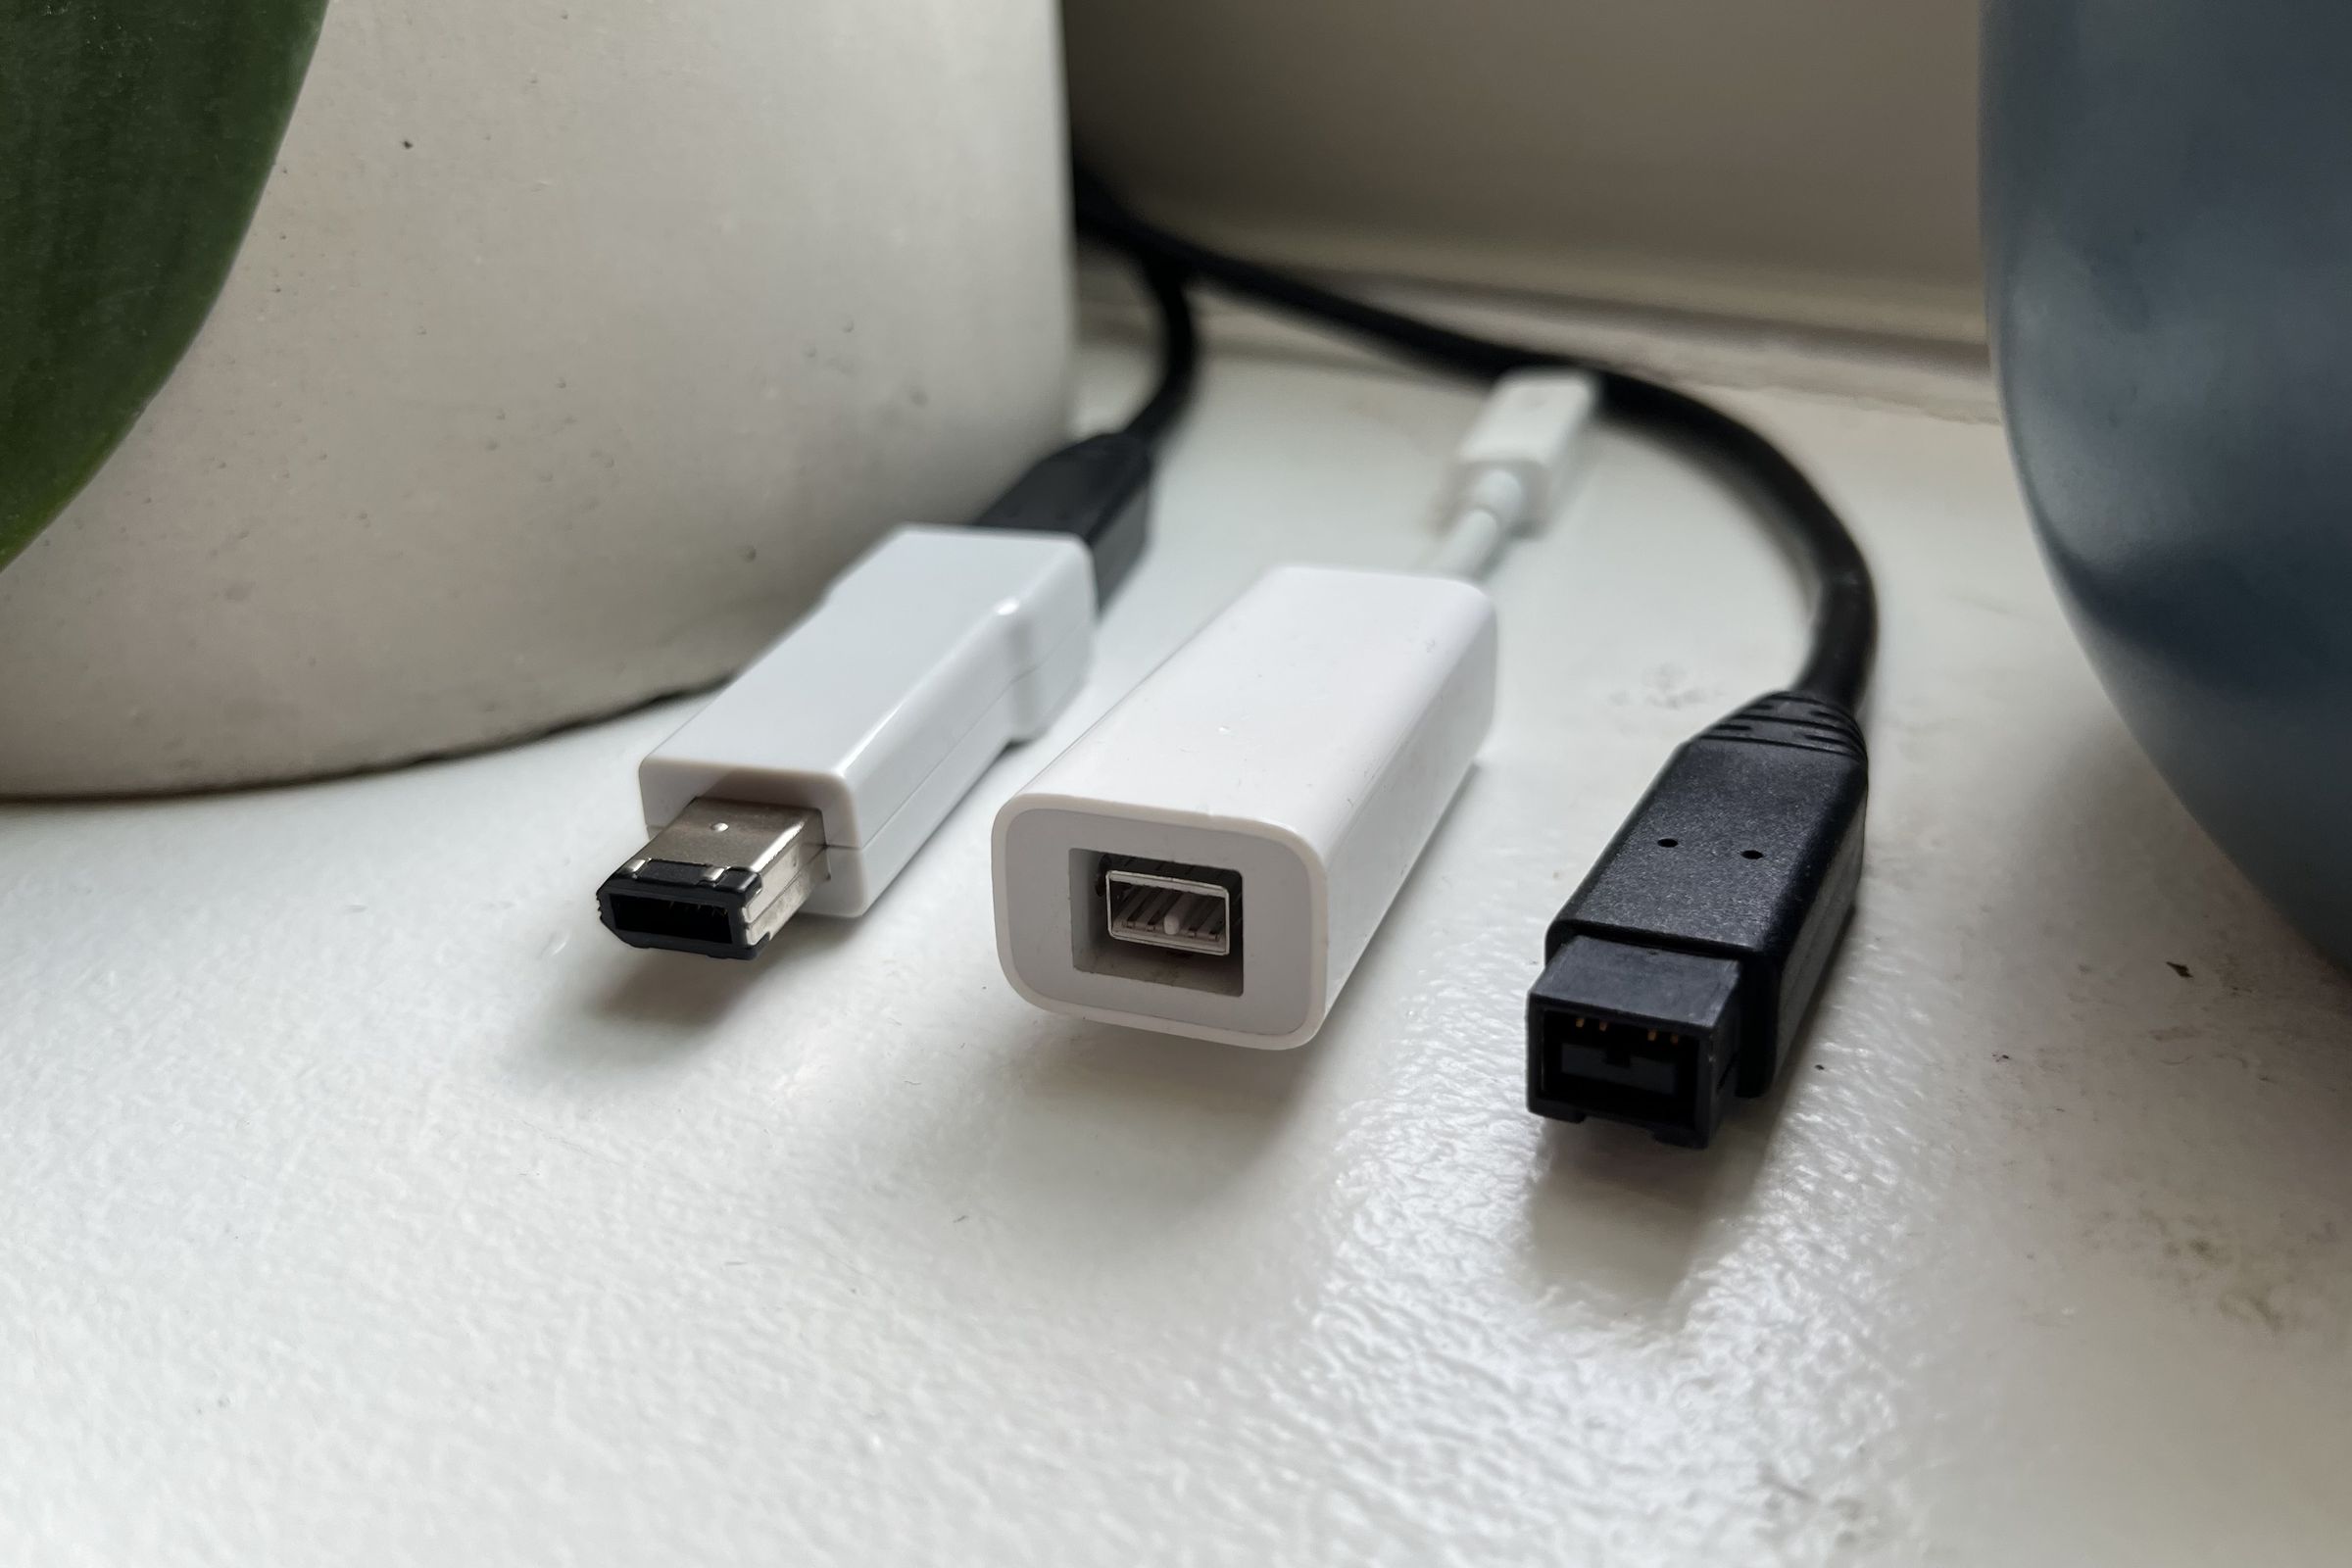 Not pictured: a Thunderbolt 2 to Thunderbolt 3 adapter so you can use FireWire devices on today’s Mac models.